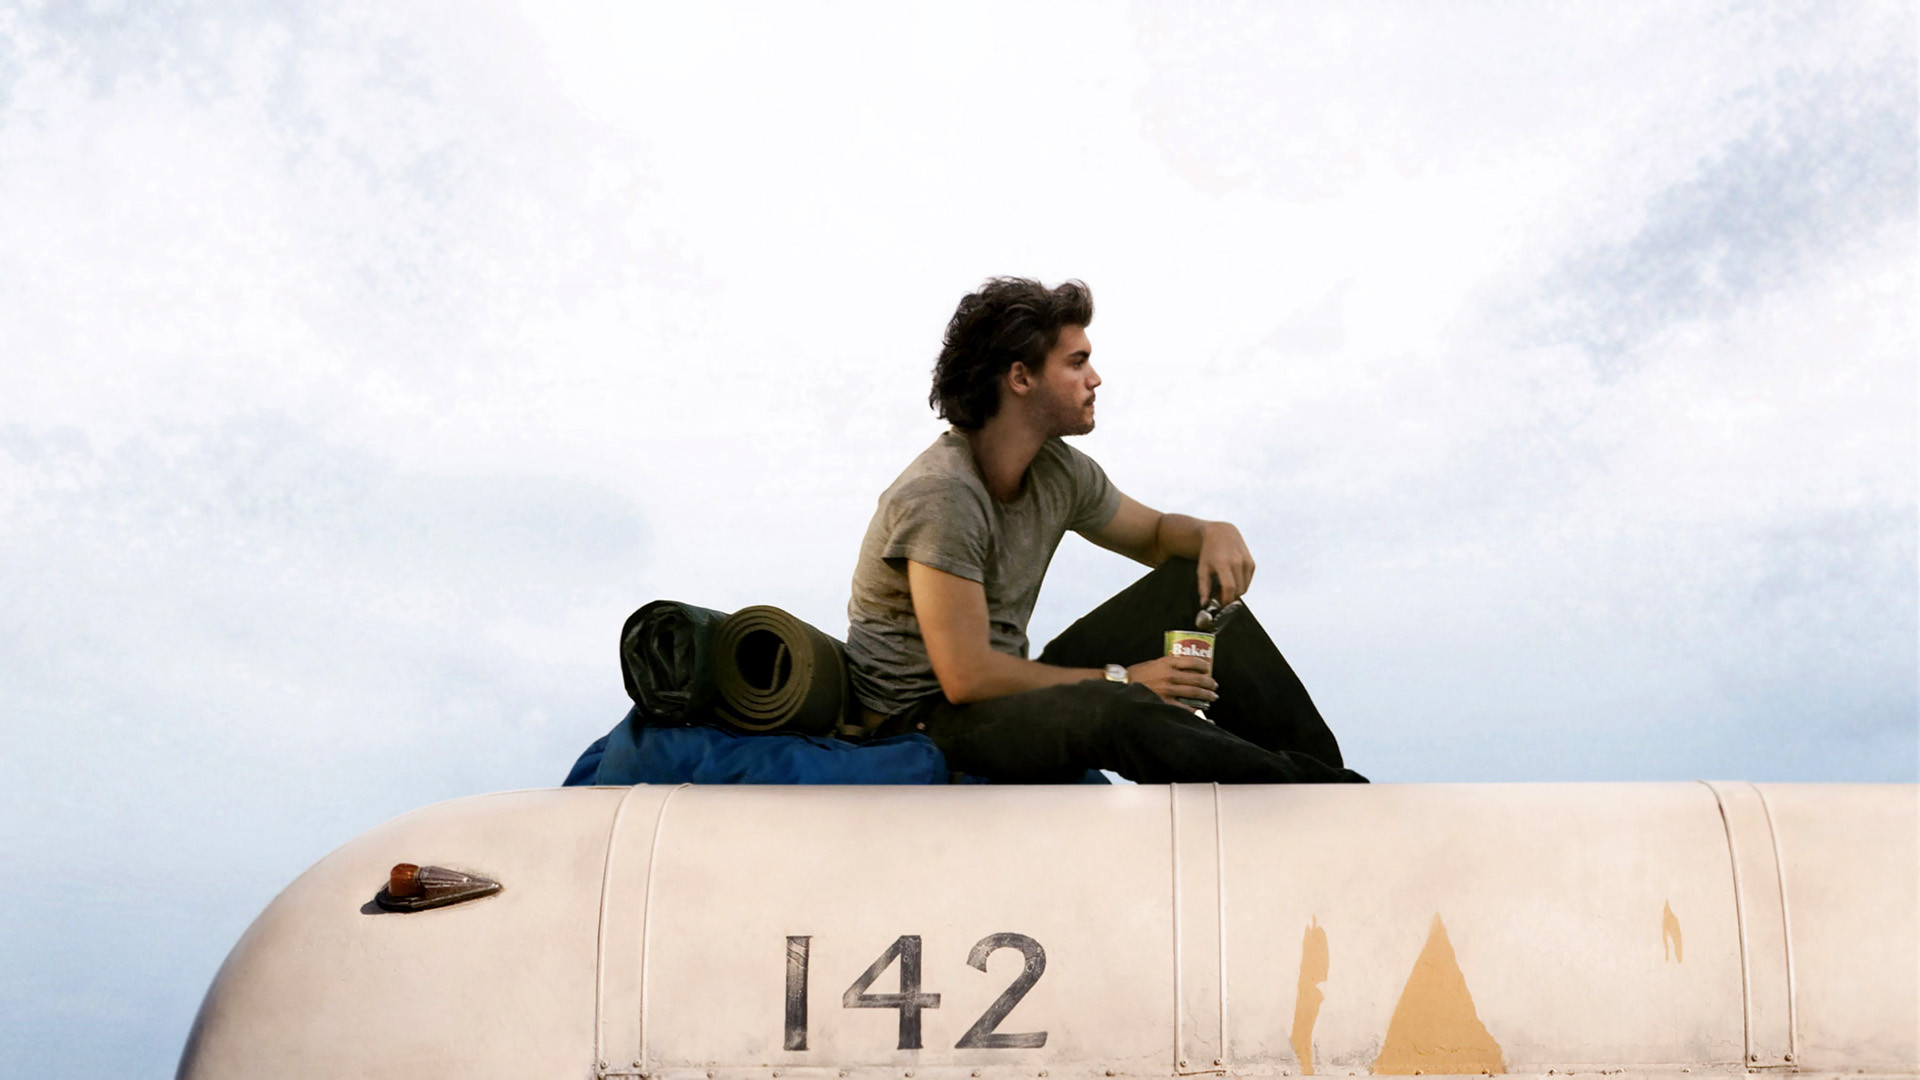 Top HD Into The Wild Wallpaper Movie HD 84.46 KB